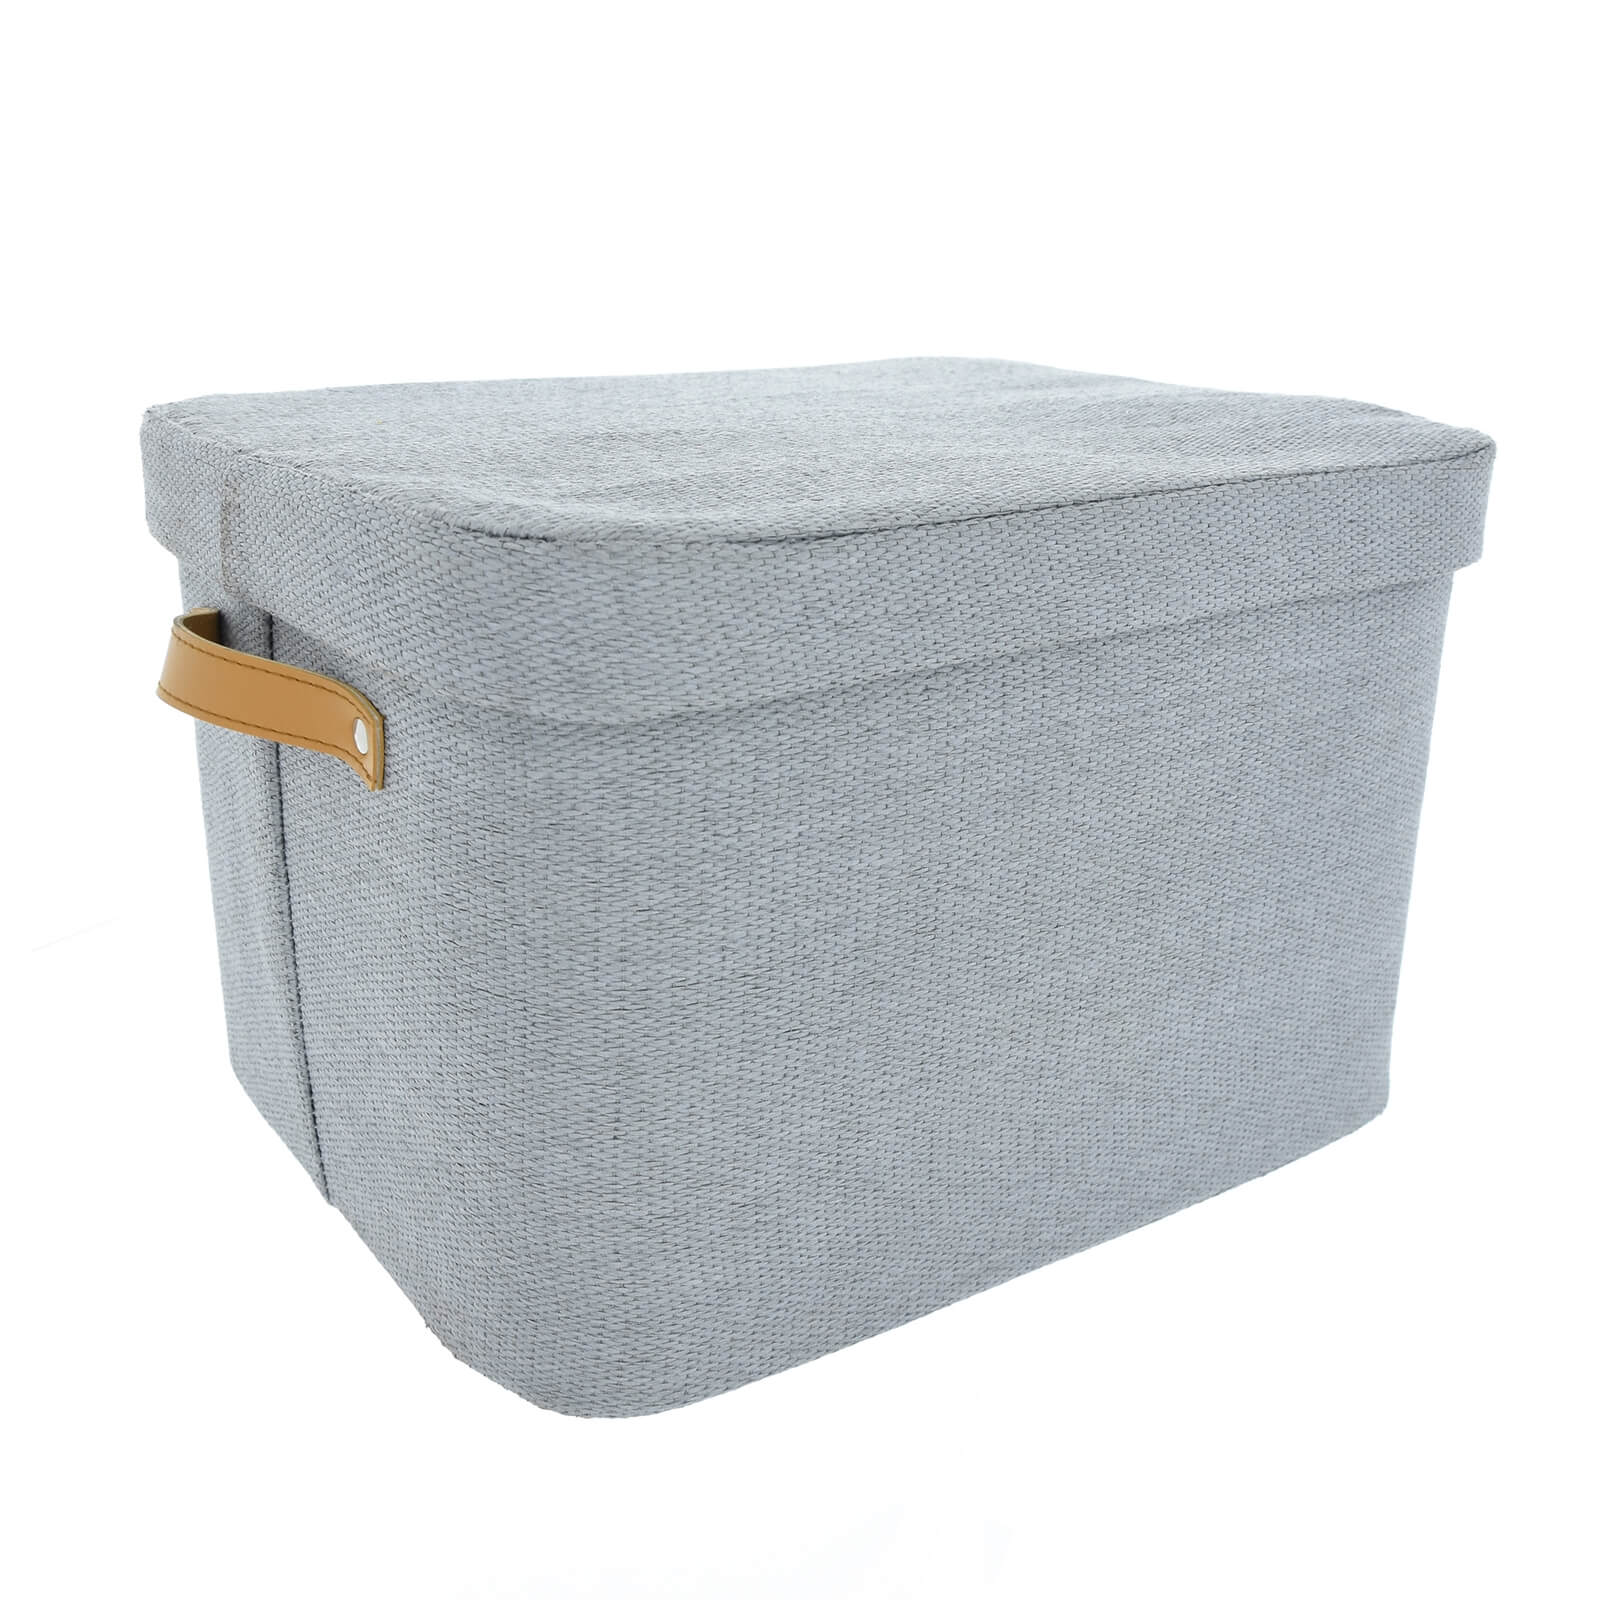 Fabric Storage Box with Faux Leather Handles